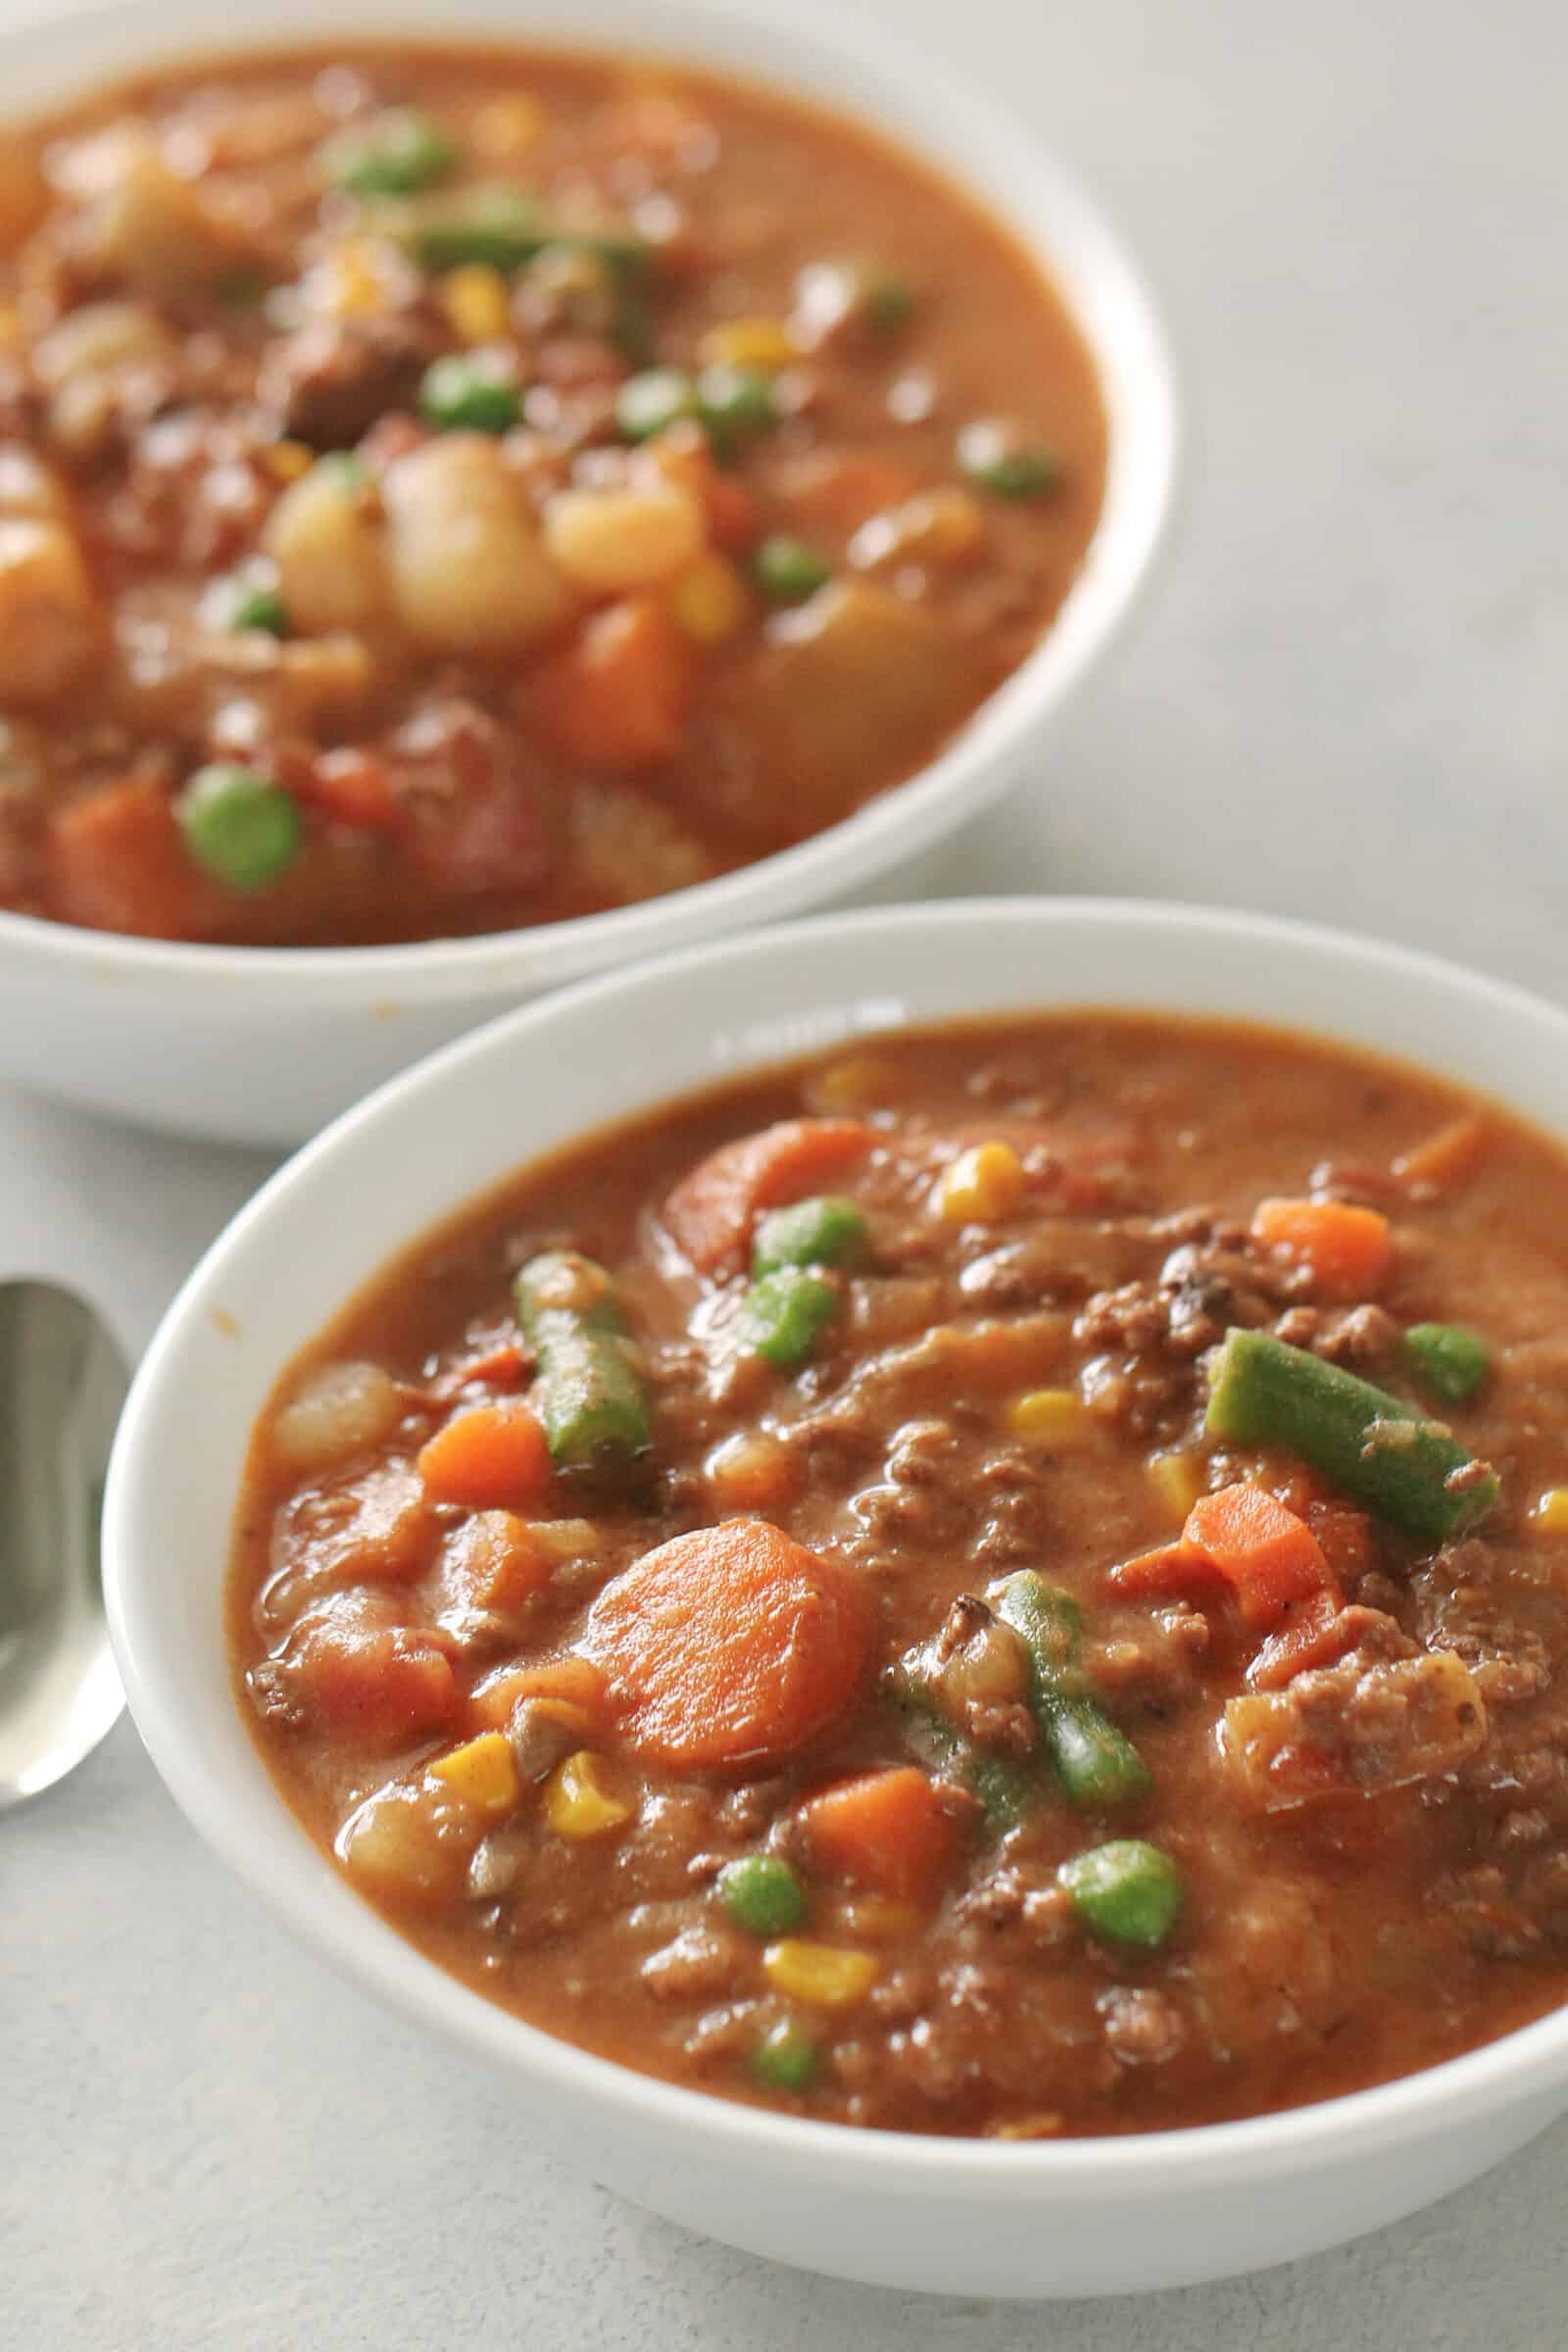 https://www.sixsistersstuff.com/wp-content/uploads/2021/04/Instant-Pot-Ground-Beef-and-Vegetable-Stew-on-SixSistersStuff-scaled.jpg